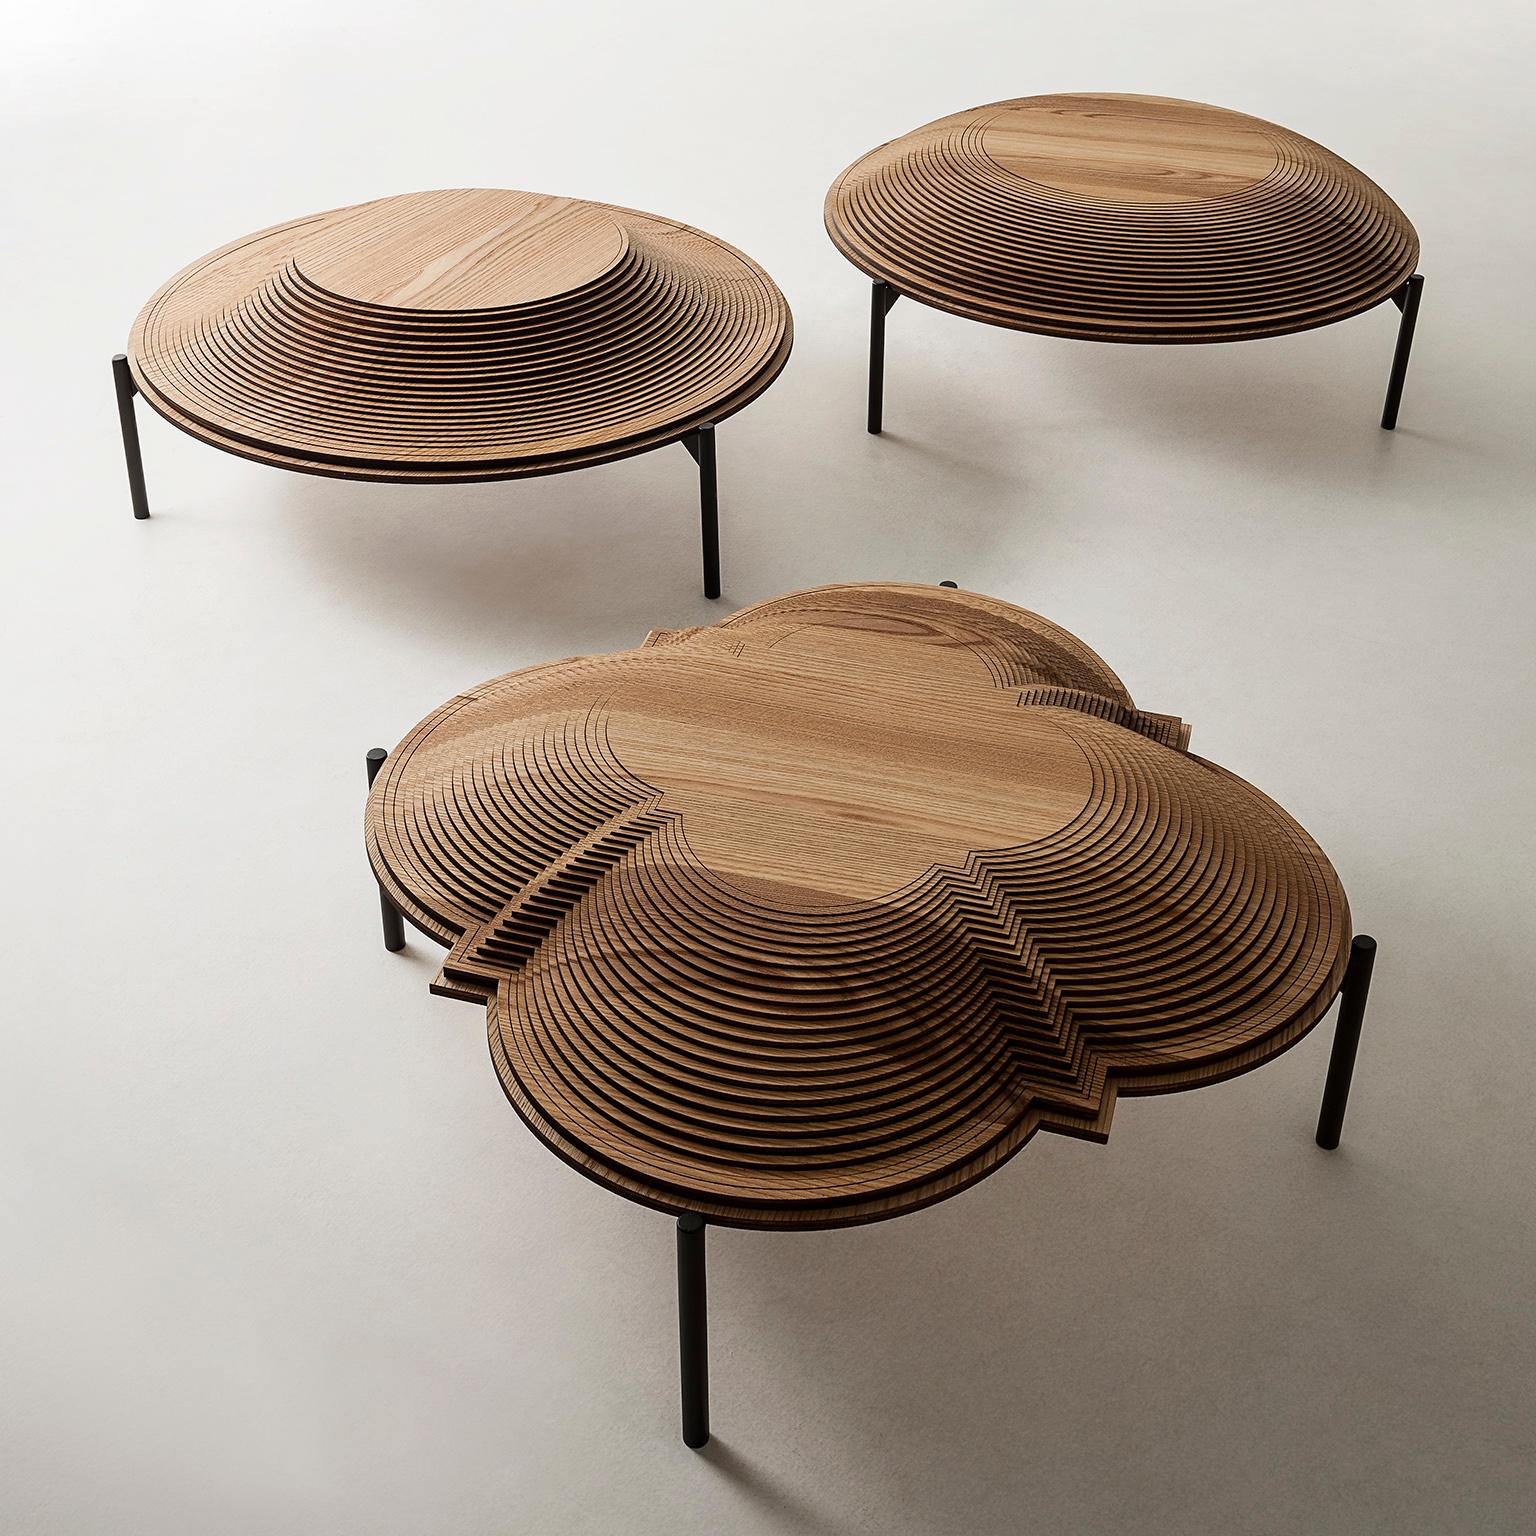 Contemporary Modern Sculptural Wood Coffee Table 